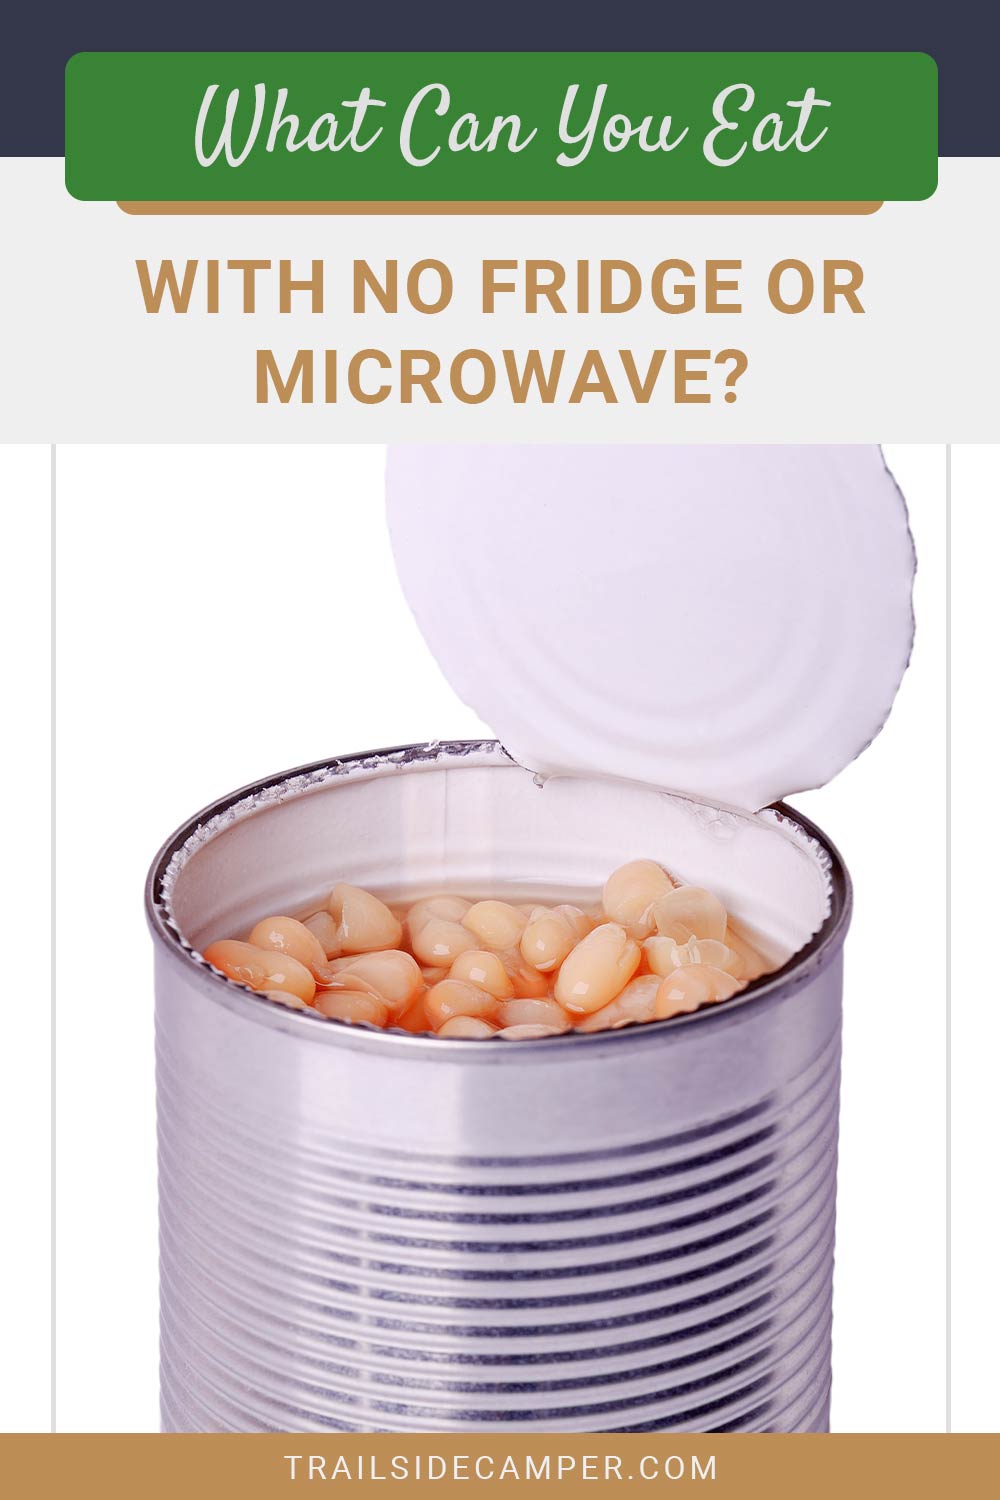 What Can You Eat With No Fridge or Microwave?